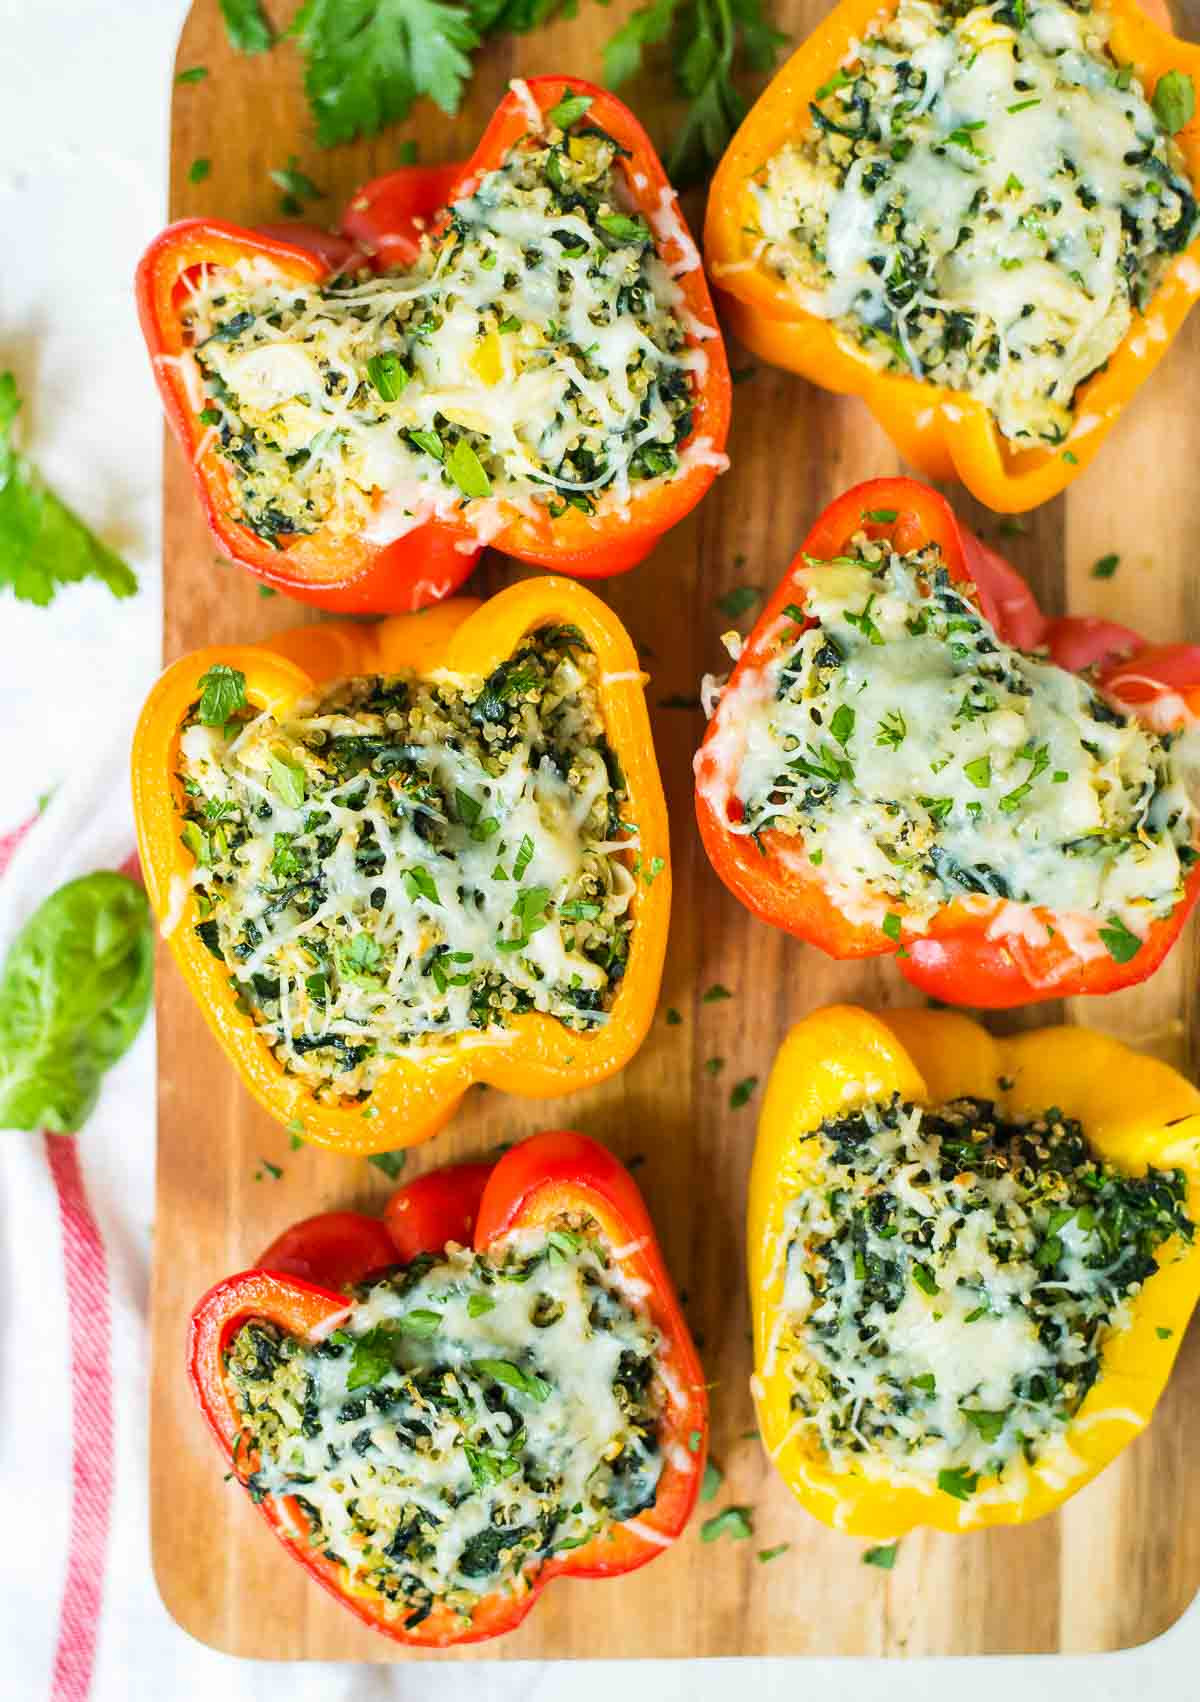 Vegan Stuffed Bell Peppers Recipe
 The 15 Best Stuffed Pepper Recipes from Food Bloggers We Love